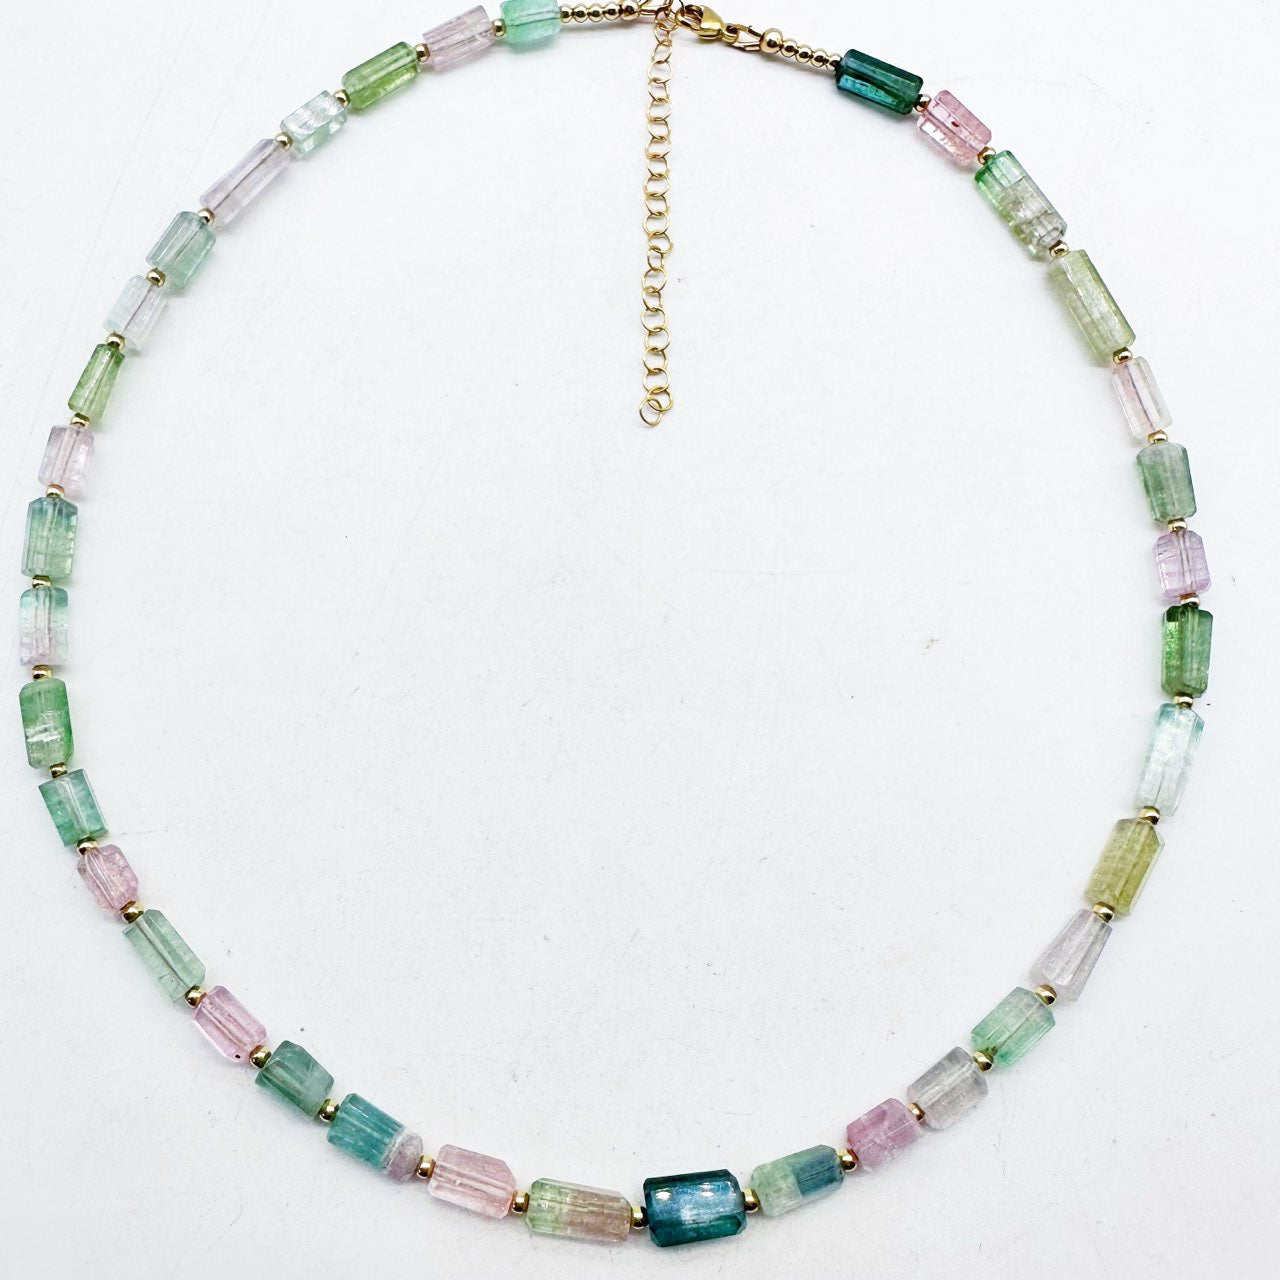 ONE OF A KIND WATERMELON TOURMALINE STRAND WITH GOLD